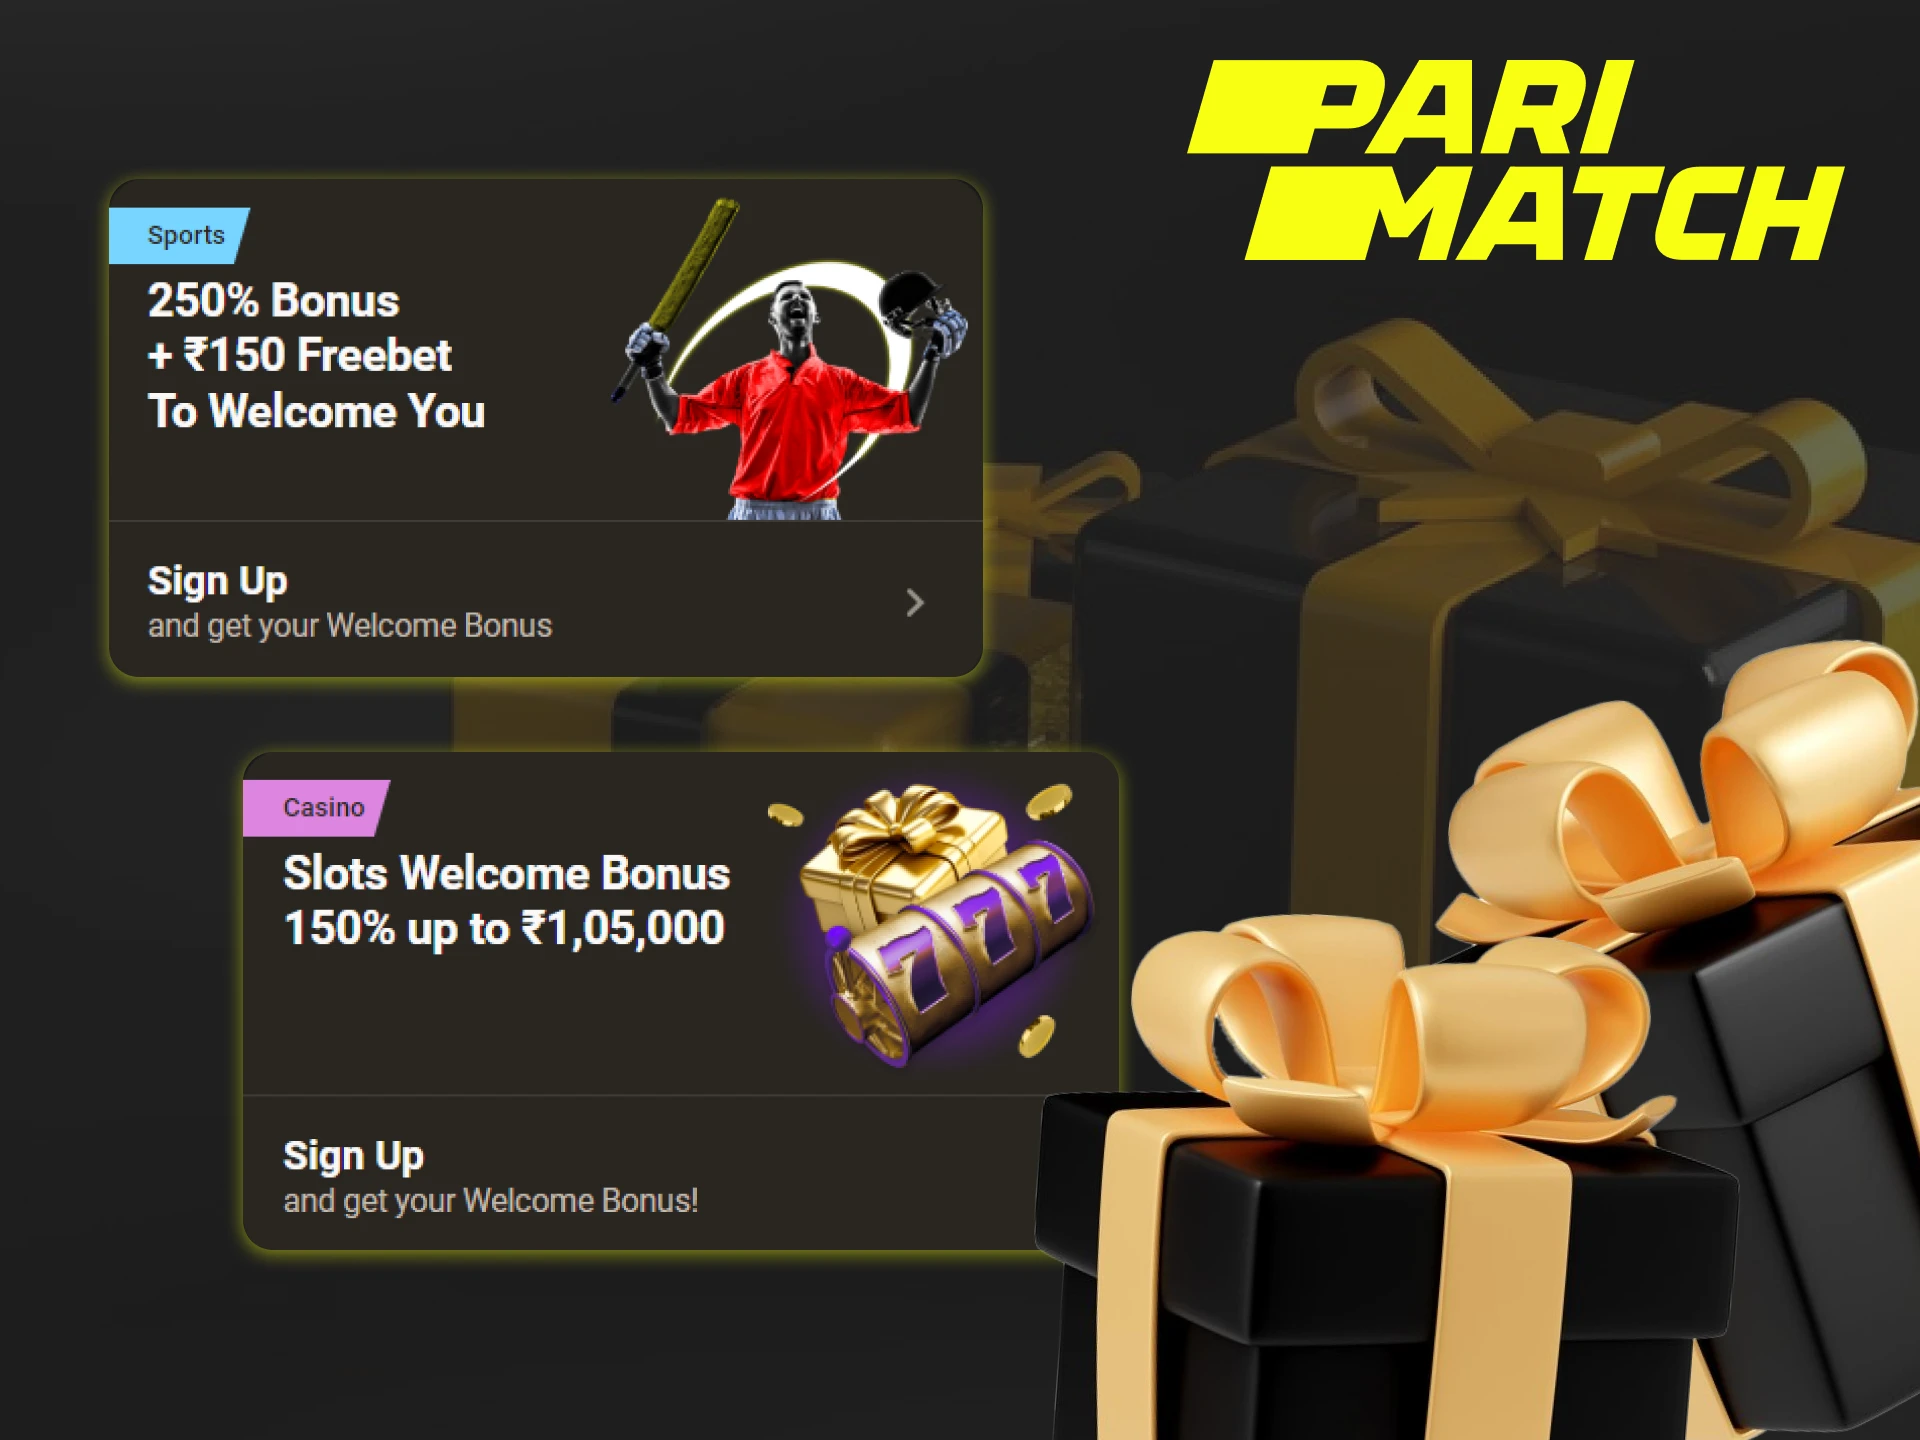 Receive a lucrative welcome bonus when you register with Parimatch.